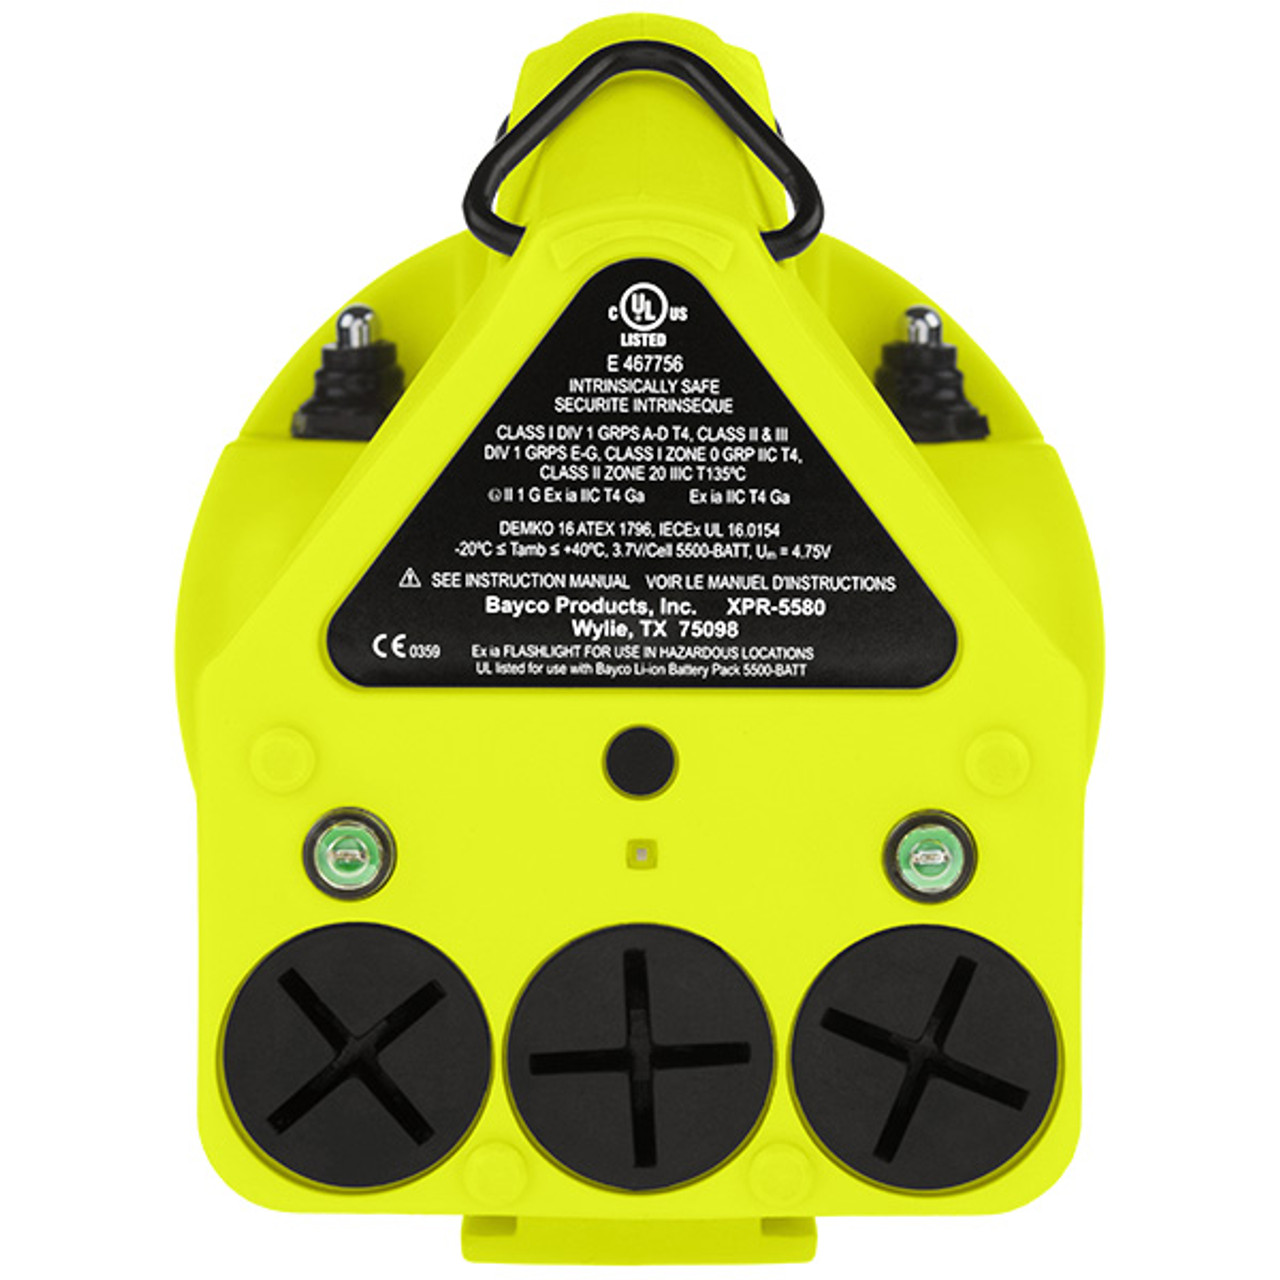 Nightstick Intrinsically Safe Dual-Light™ Lantern - Rechargeable-Yellow